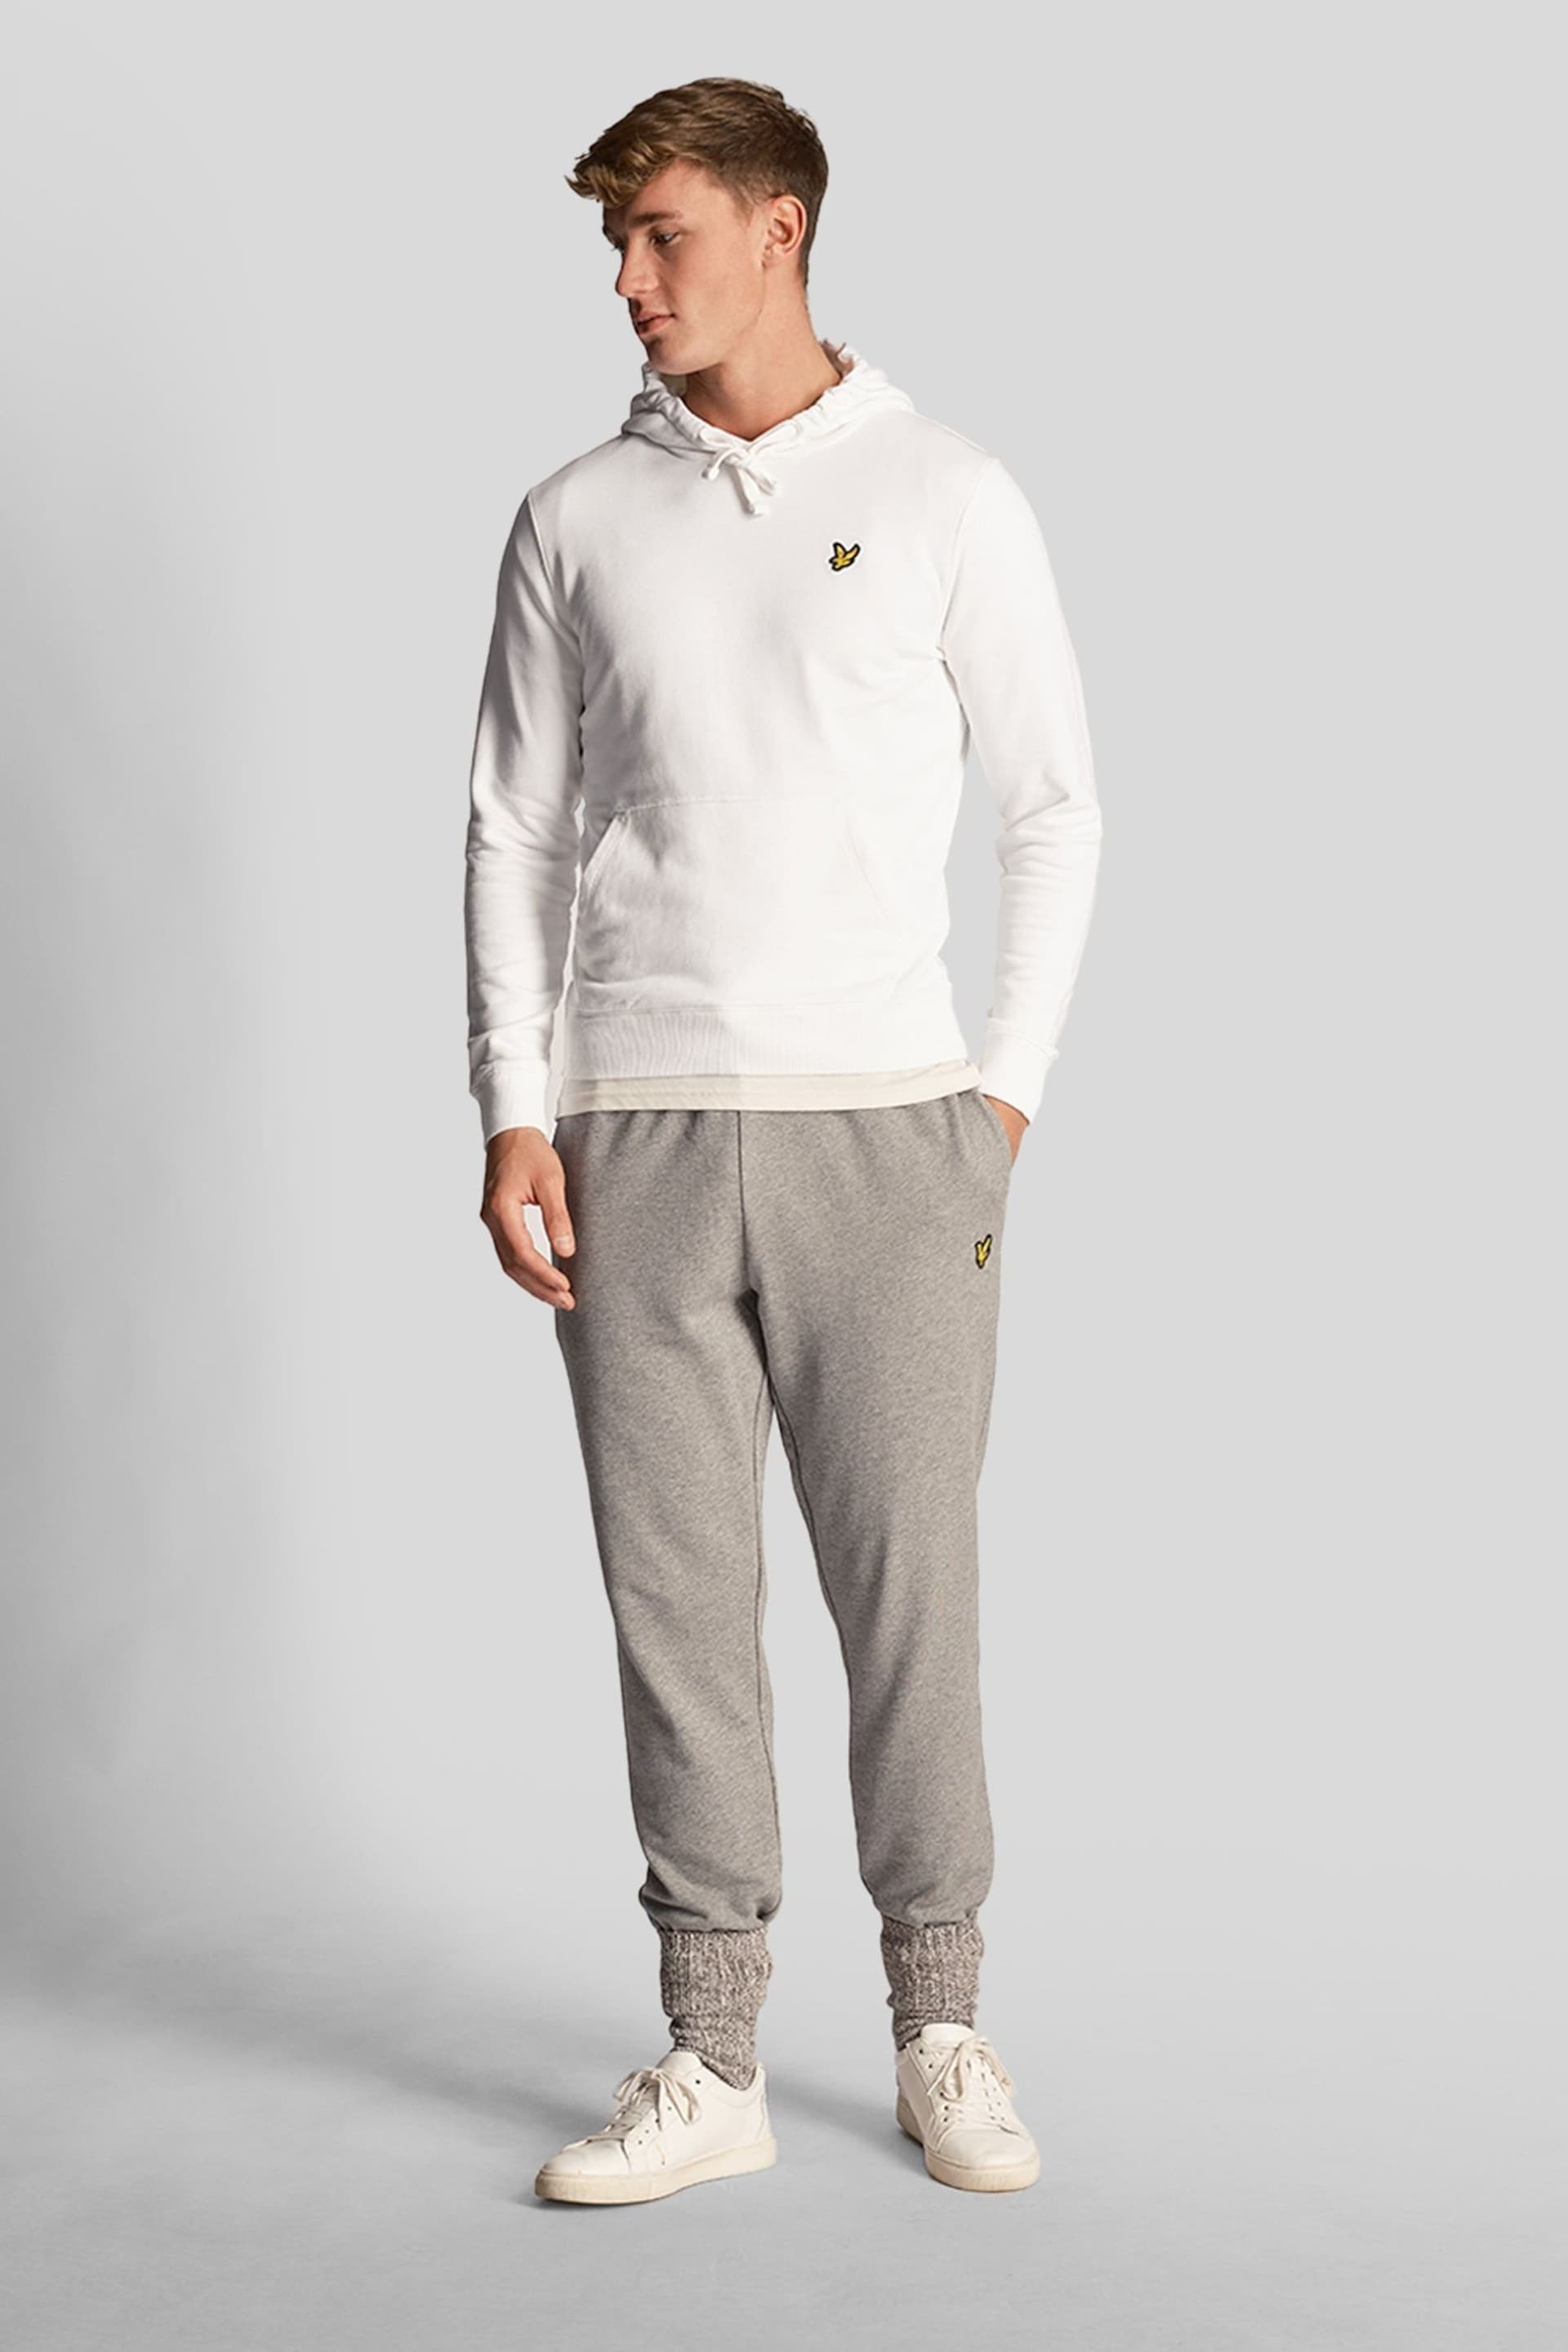 Lyle & Scott Pullover White Hoodie - Image 5 of 9